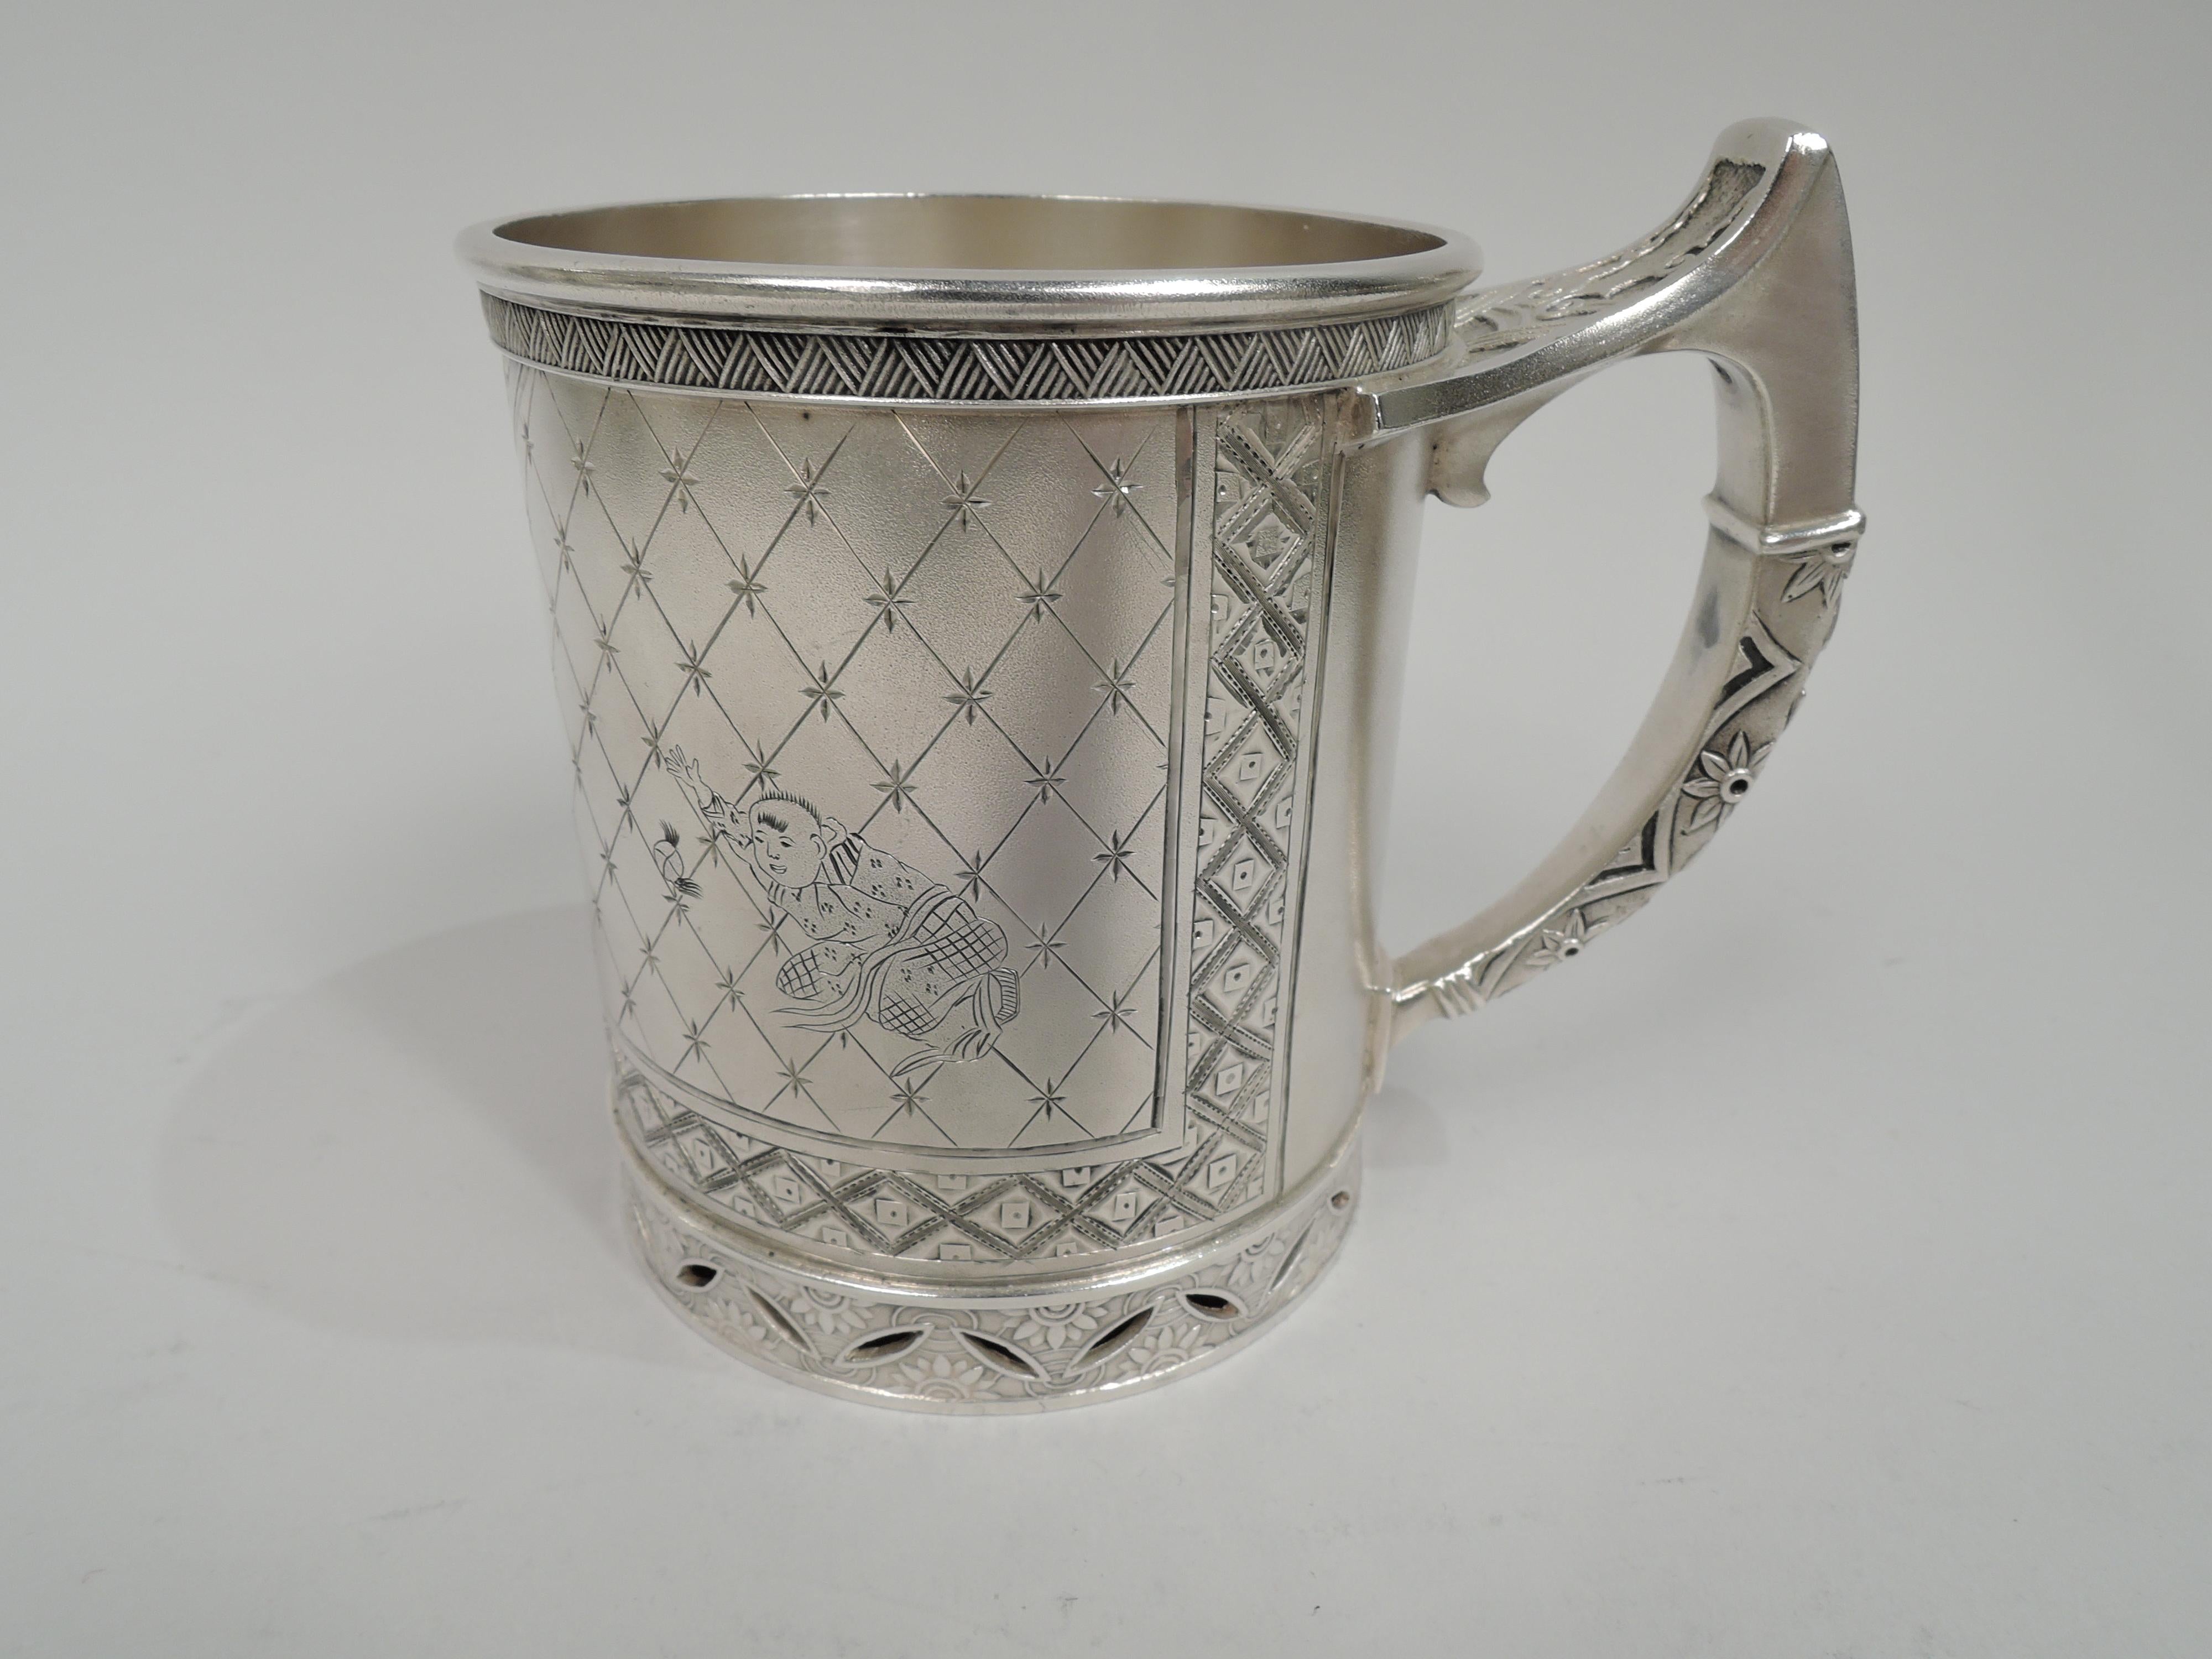 Market-fresh modish Japonesque sterling silver baby cup. Retailed by Tiffany & Co. in Union Square, New York. Straight sides and split-mounted high-looping. Butler-finish with kimono-clad, bristly-haired figures. One peeps from behind round